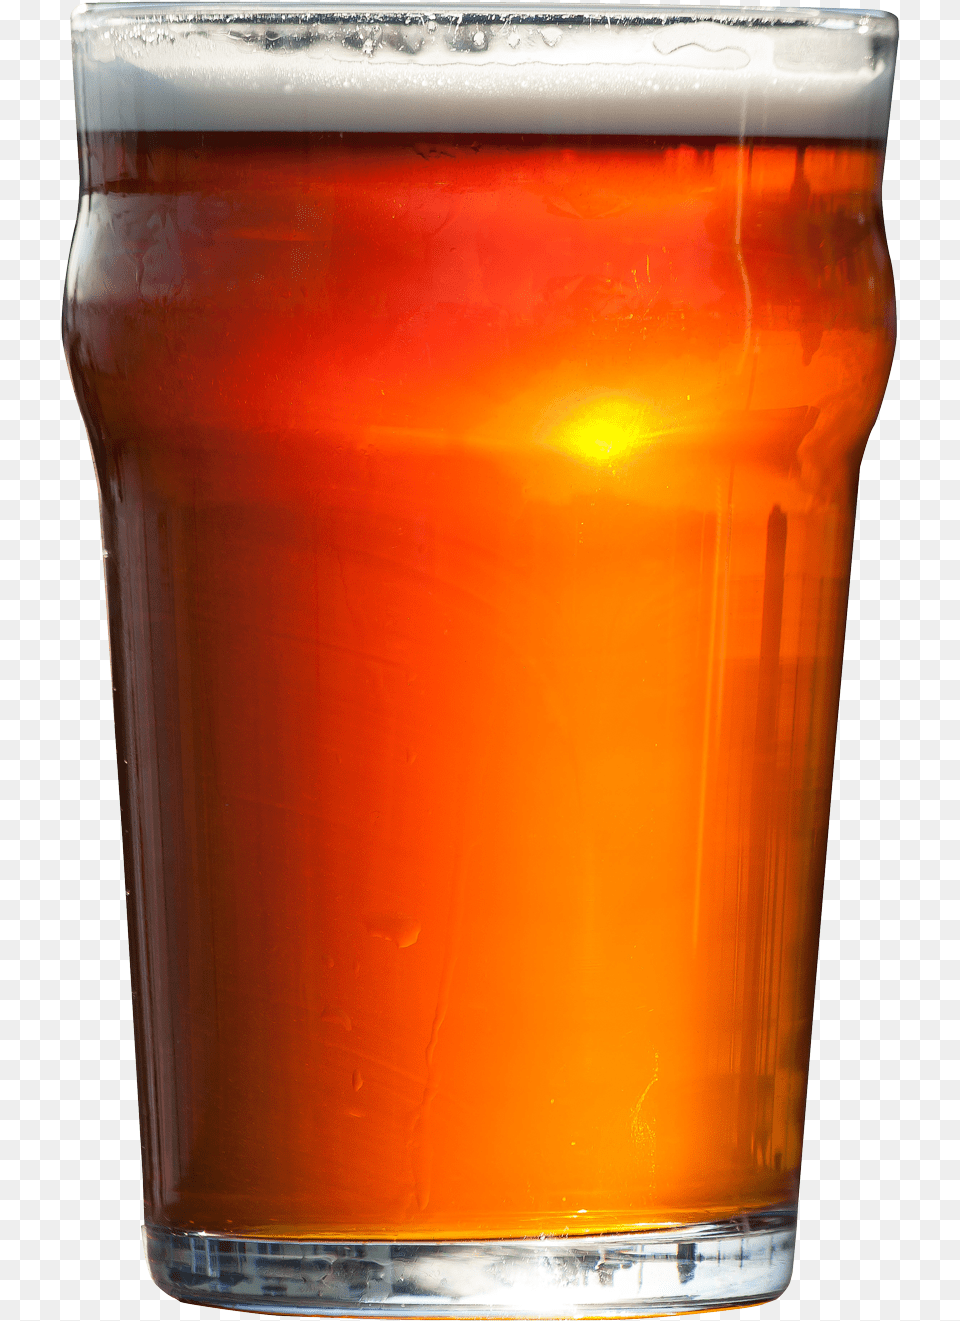 A Glass Of Beer Beer, Alcohol, Beer Glass, Beverage, Lager Png